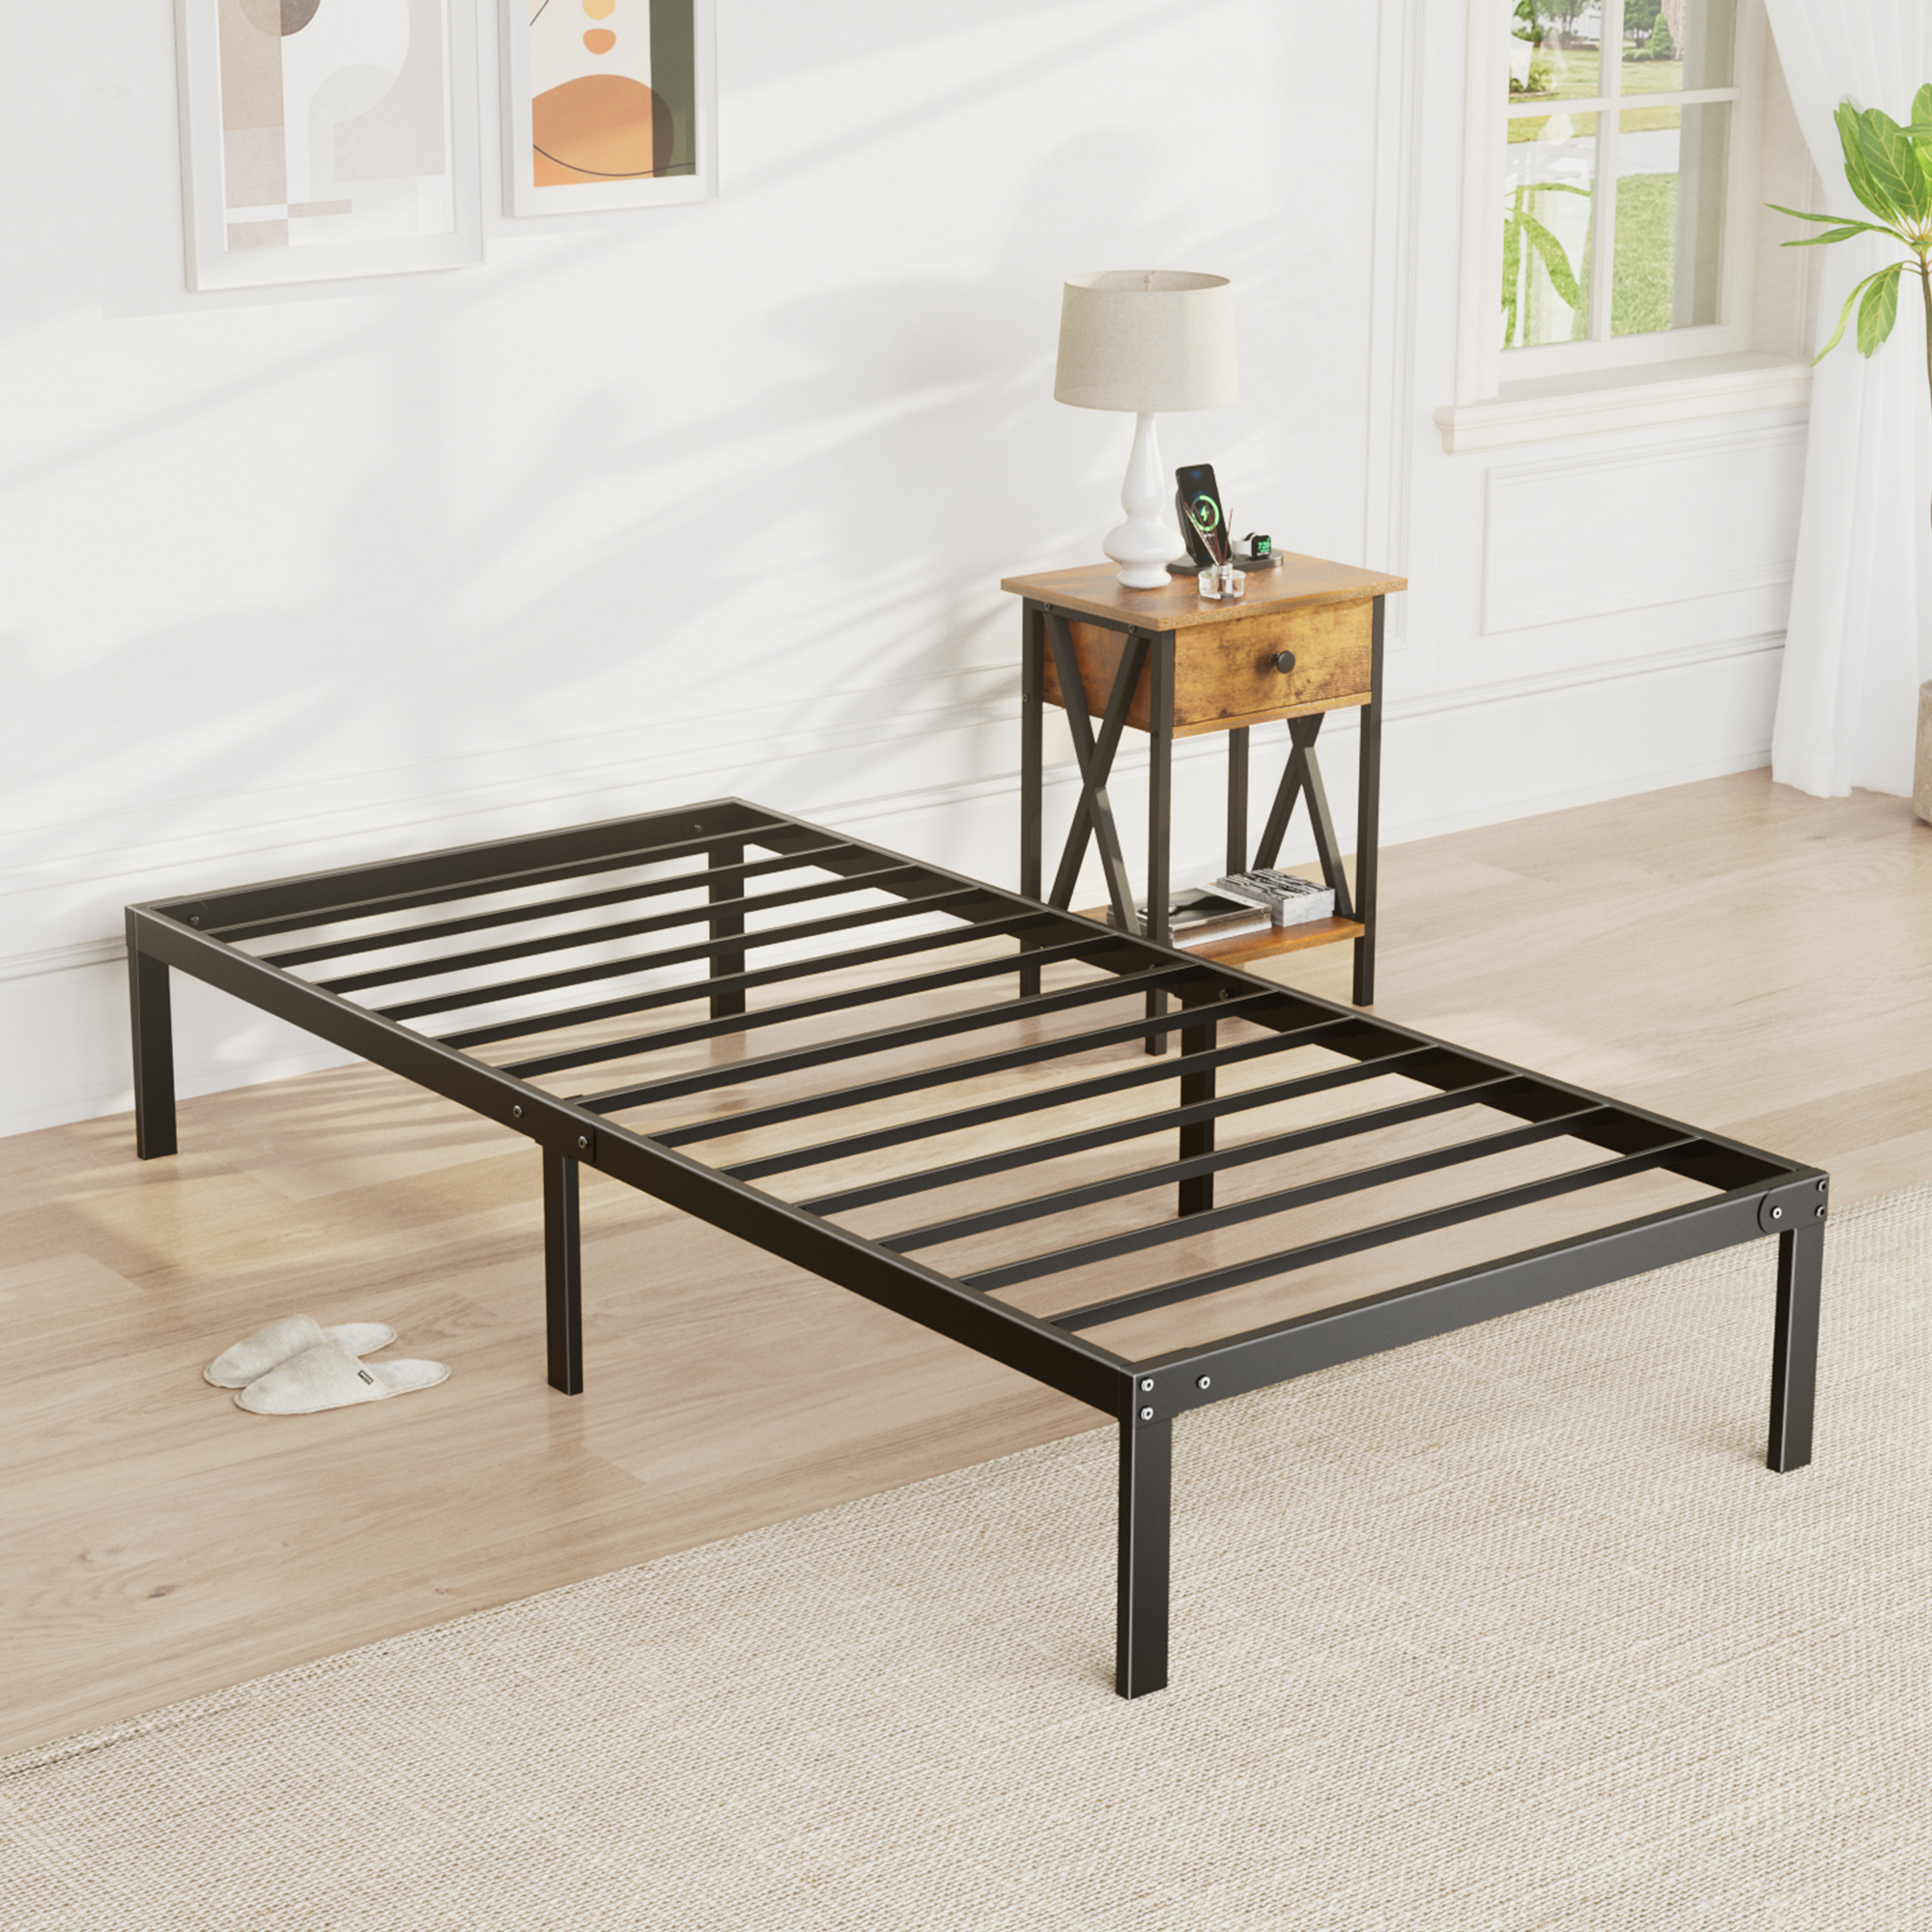 Heavy Duty Metal Twin Bed Frame with Under Bed Storage - 14 Inches High, Sturdy Steel Slat Support, No Box Spring Required, Platform Bed Frame - image 1 of 11